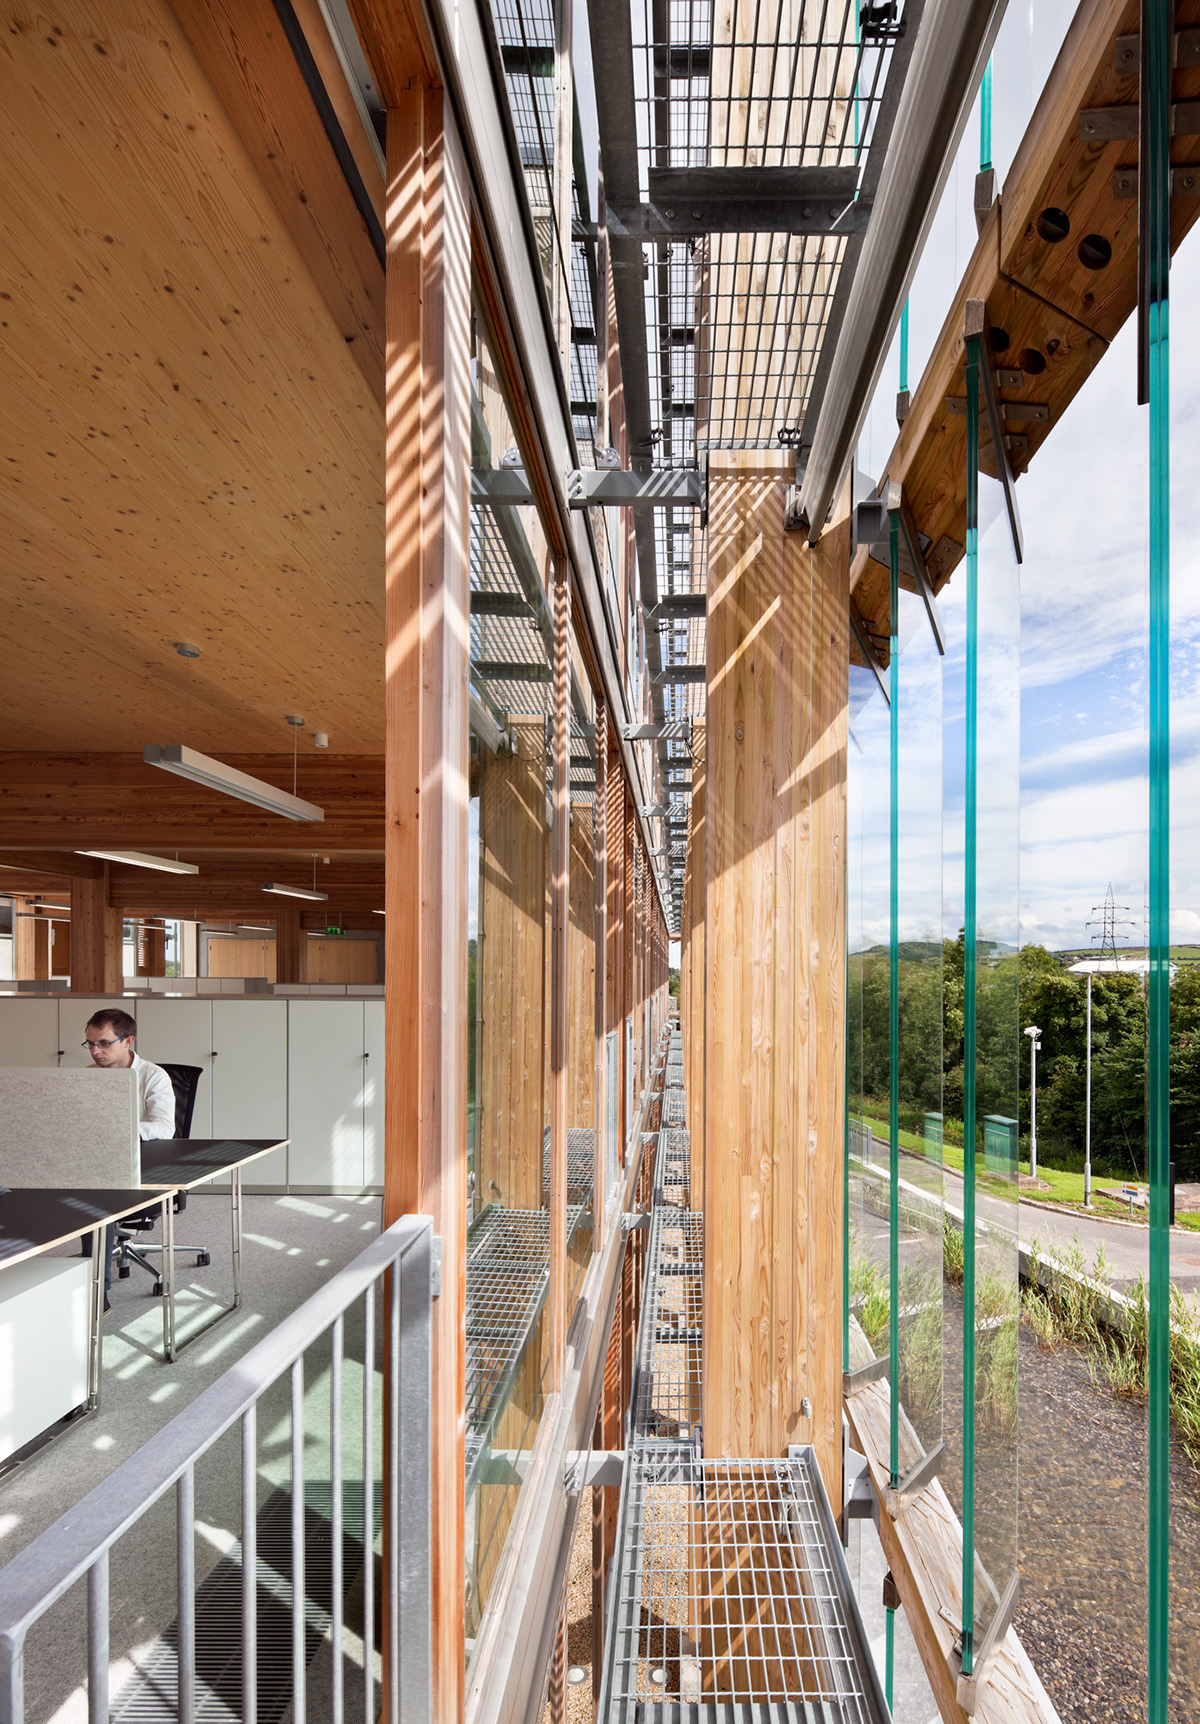 timber building wood building Low Energy Building green building Sustainable Design Environmental Management incubator building Laboratory building research building Public Architecture